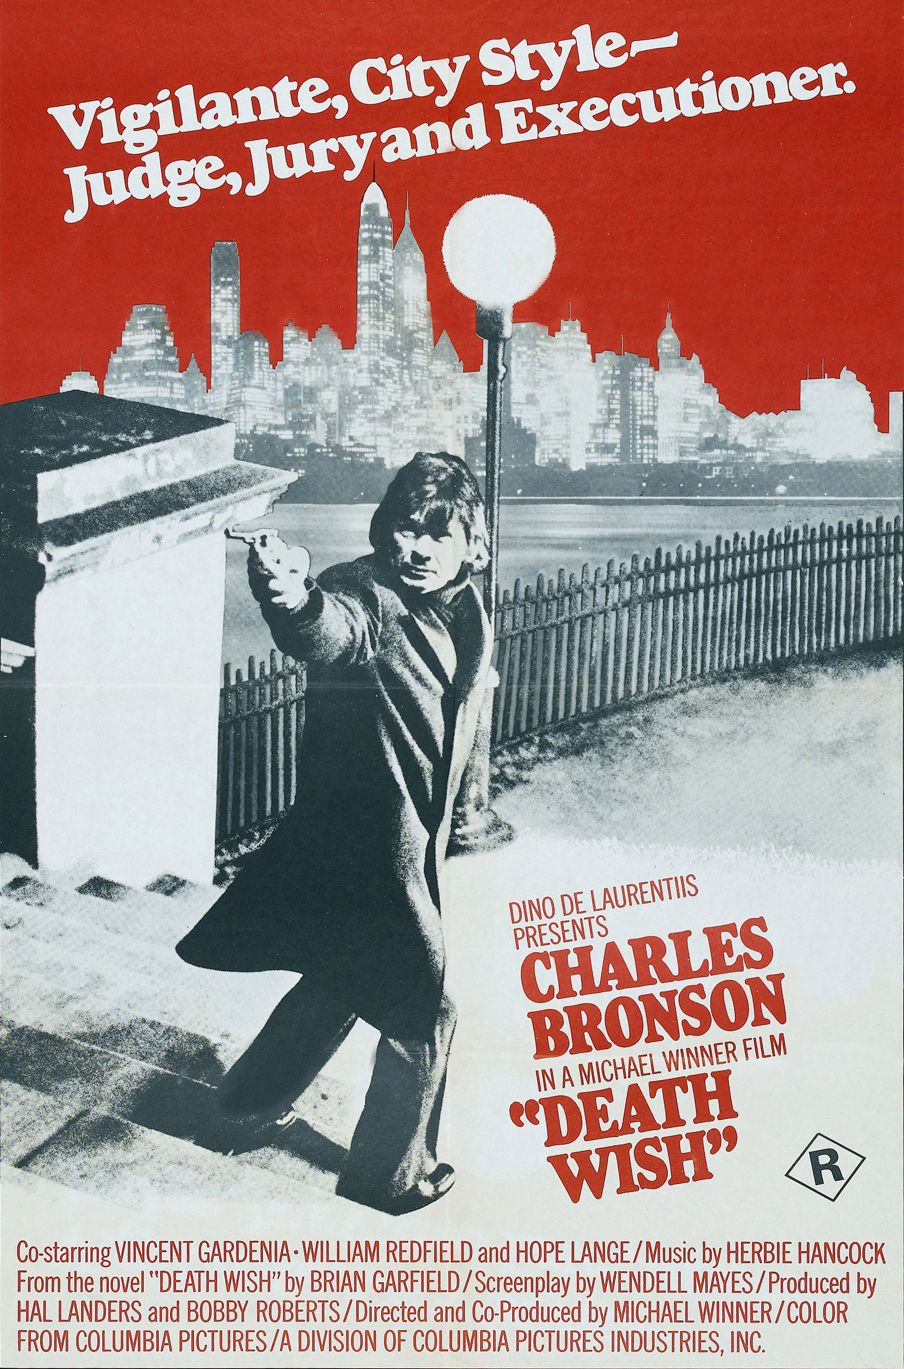 The Death Wish Series: Charles Bronson at His Best